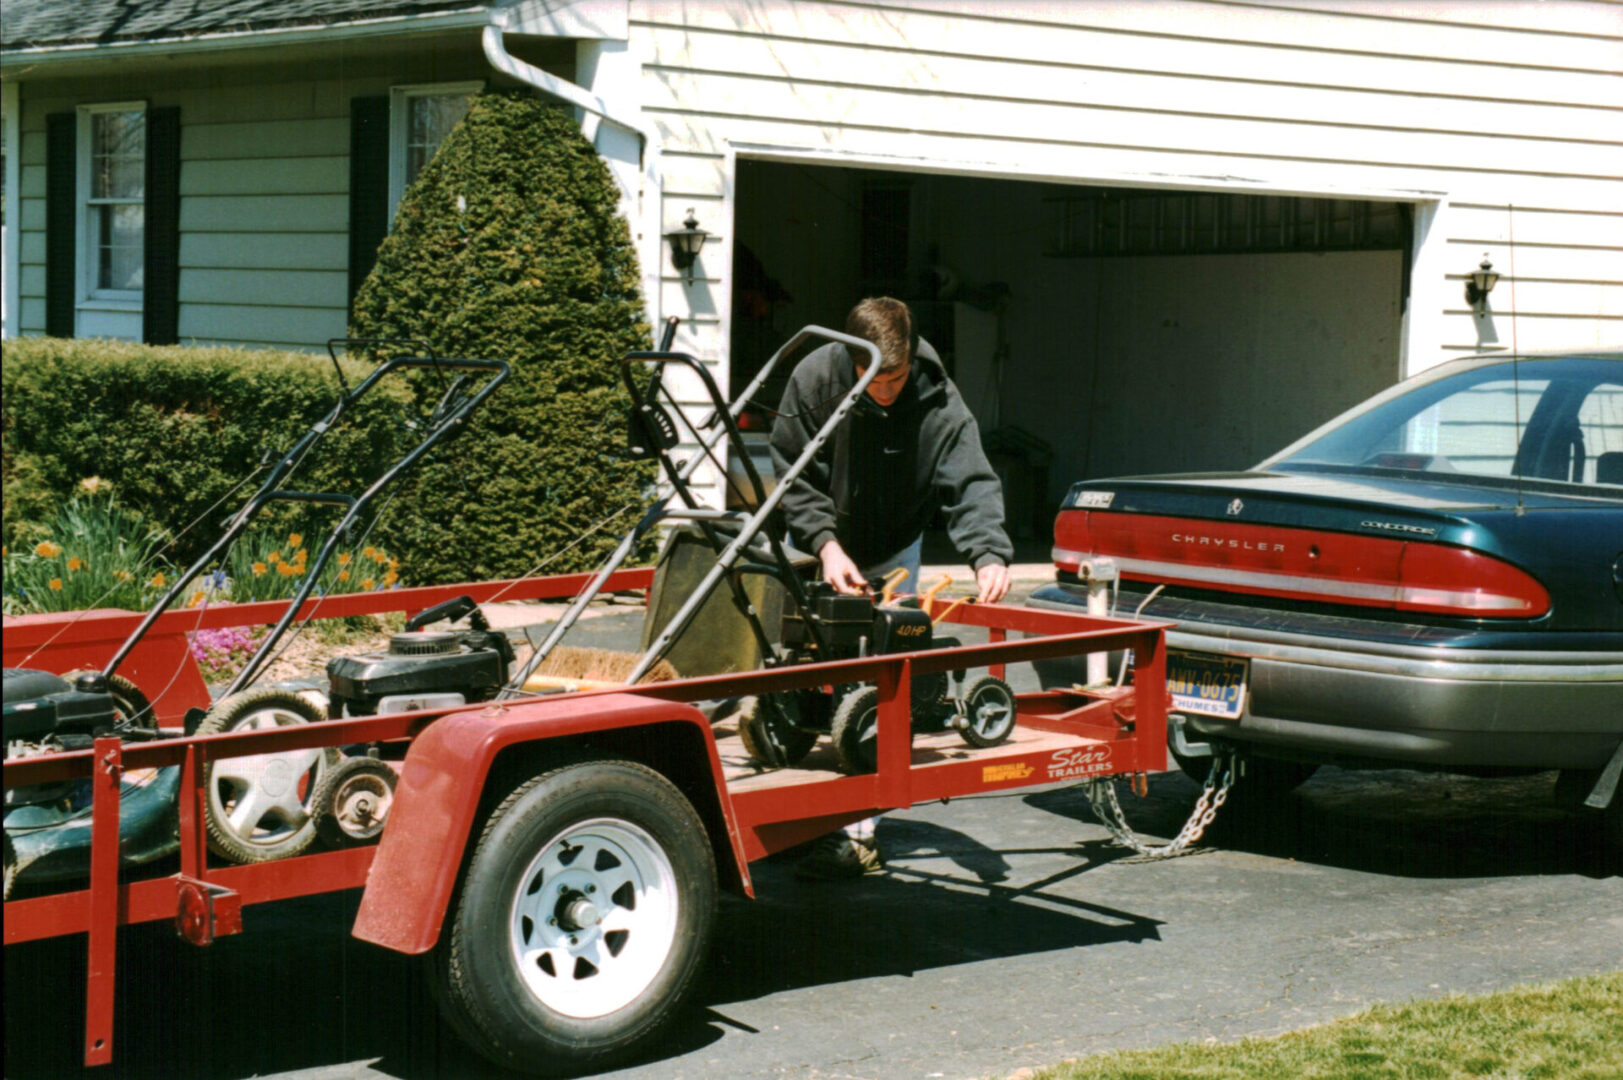 A man fixing the trailer of his car.